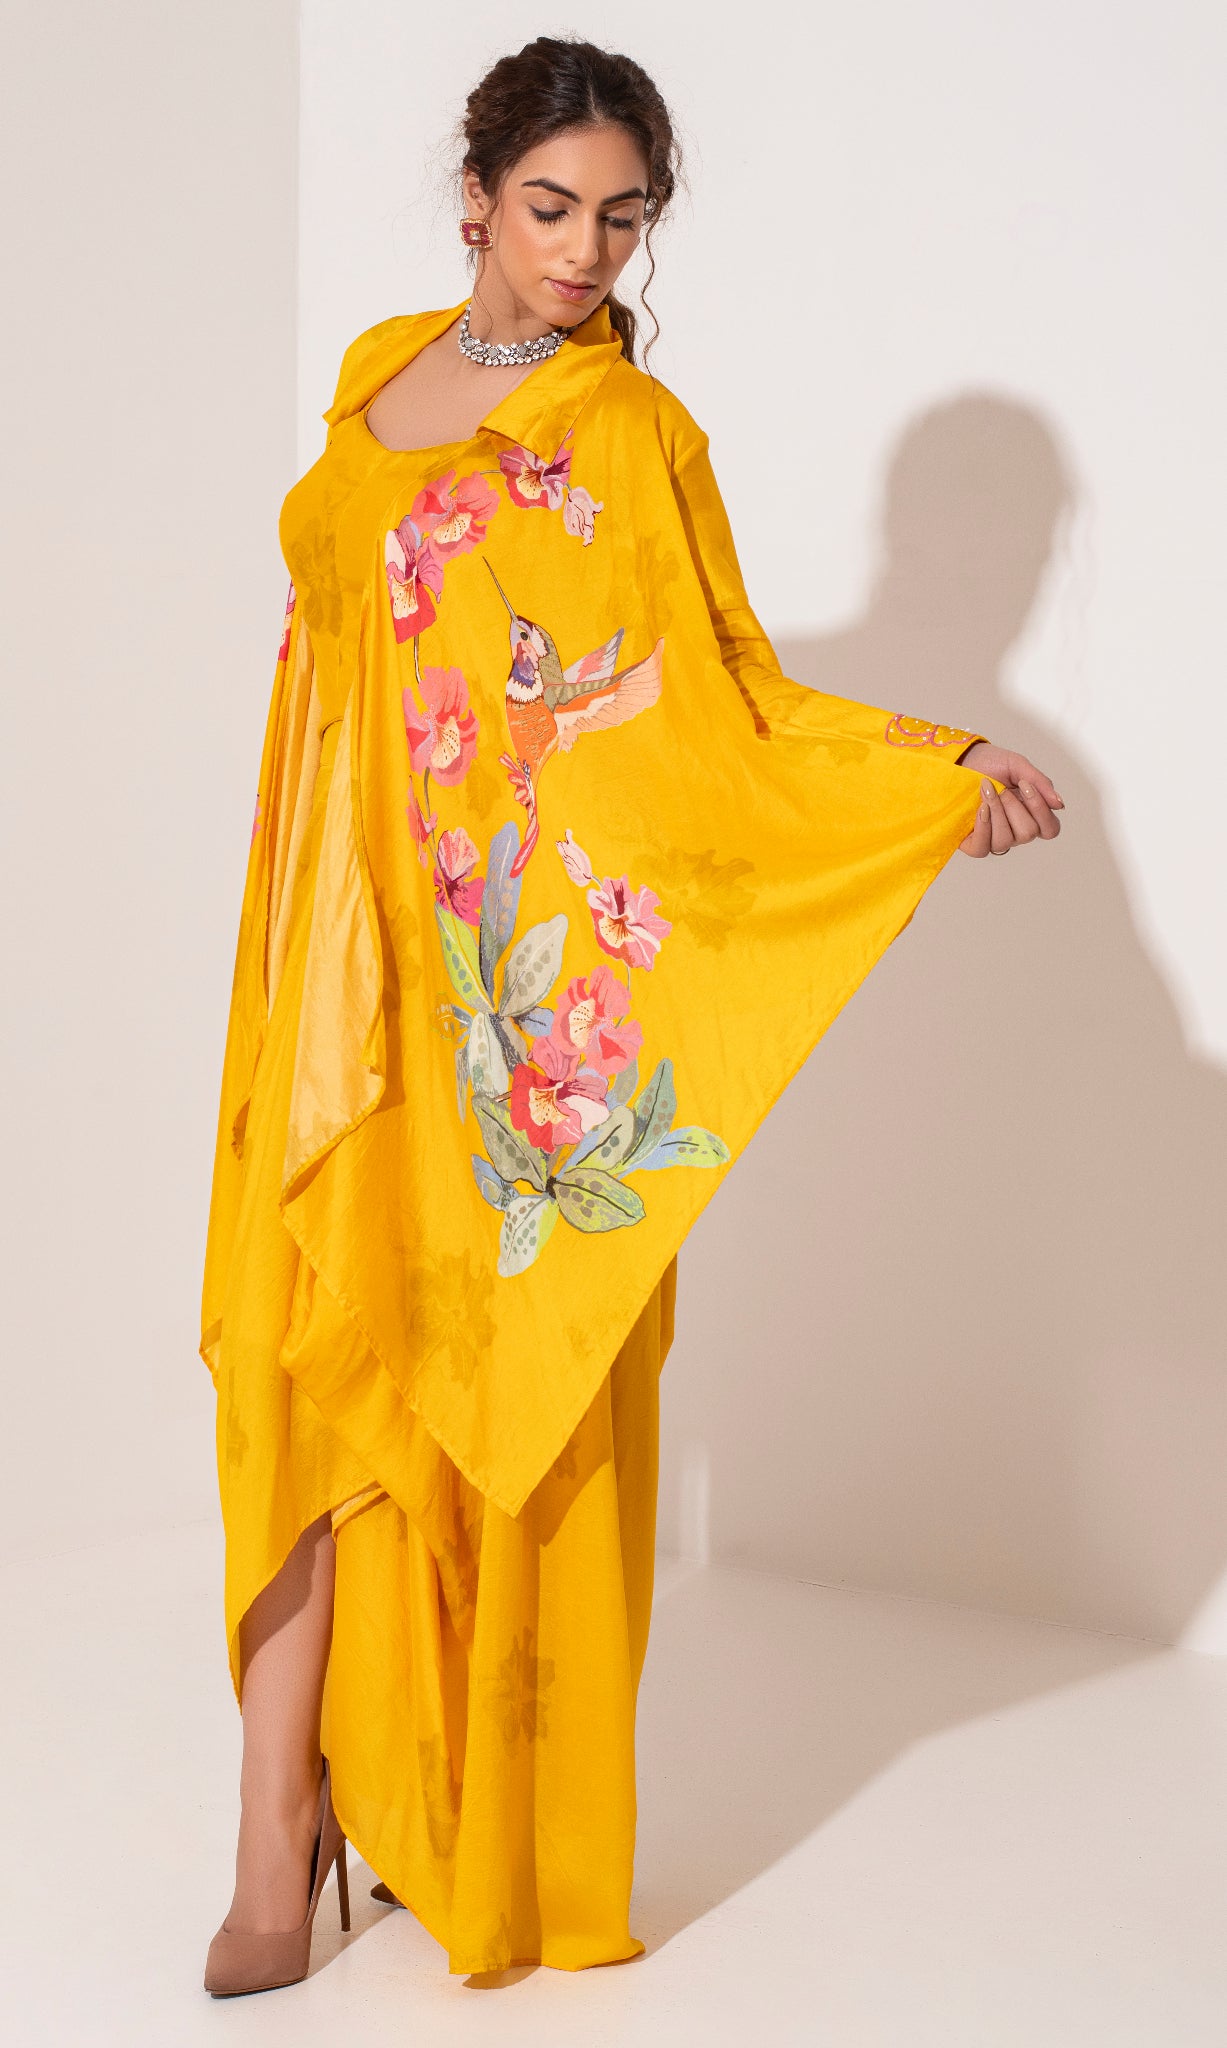 Marigold yellow silk placement printed asymmetric jacket bustier and draped skirt